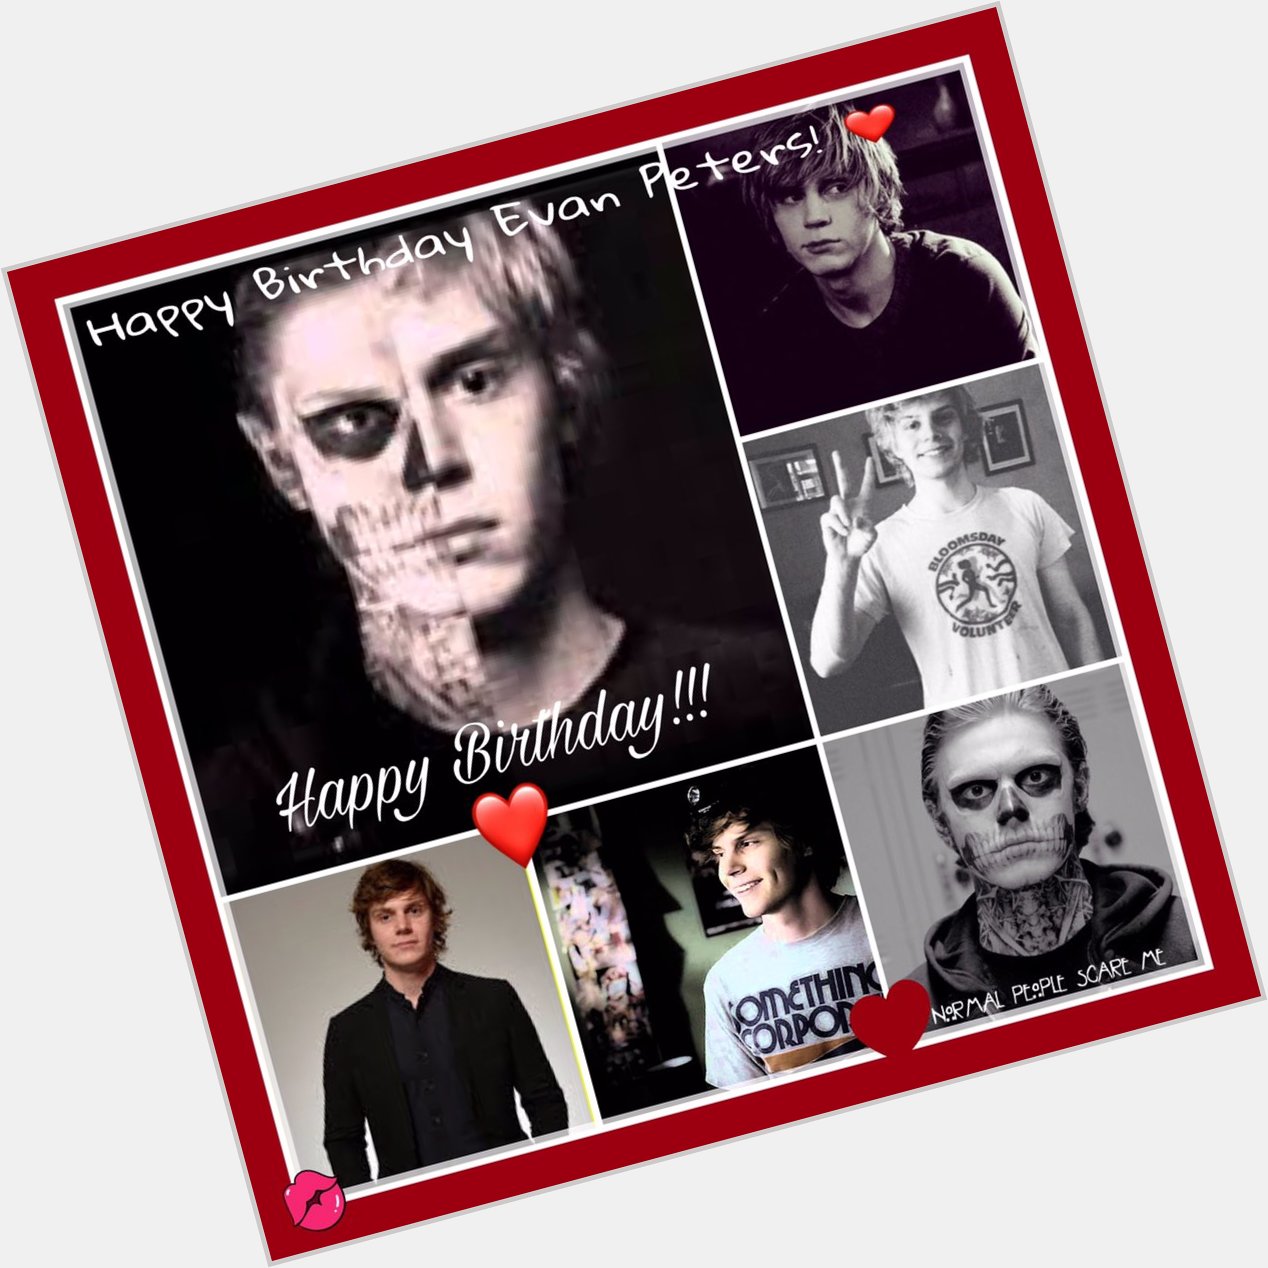 Happy Birthday Evan Peters!! I love you! Even thou u bring out nightmares you are a dream come true! 